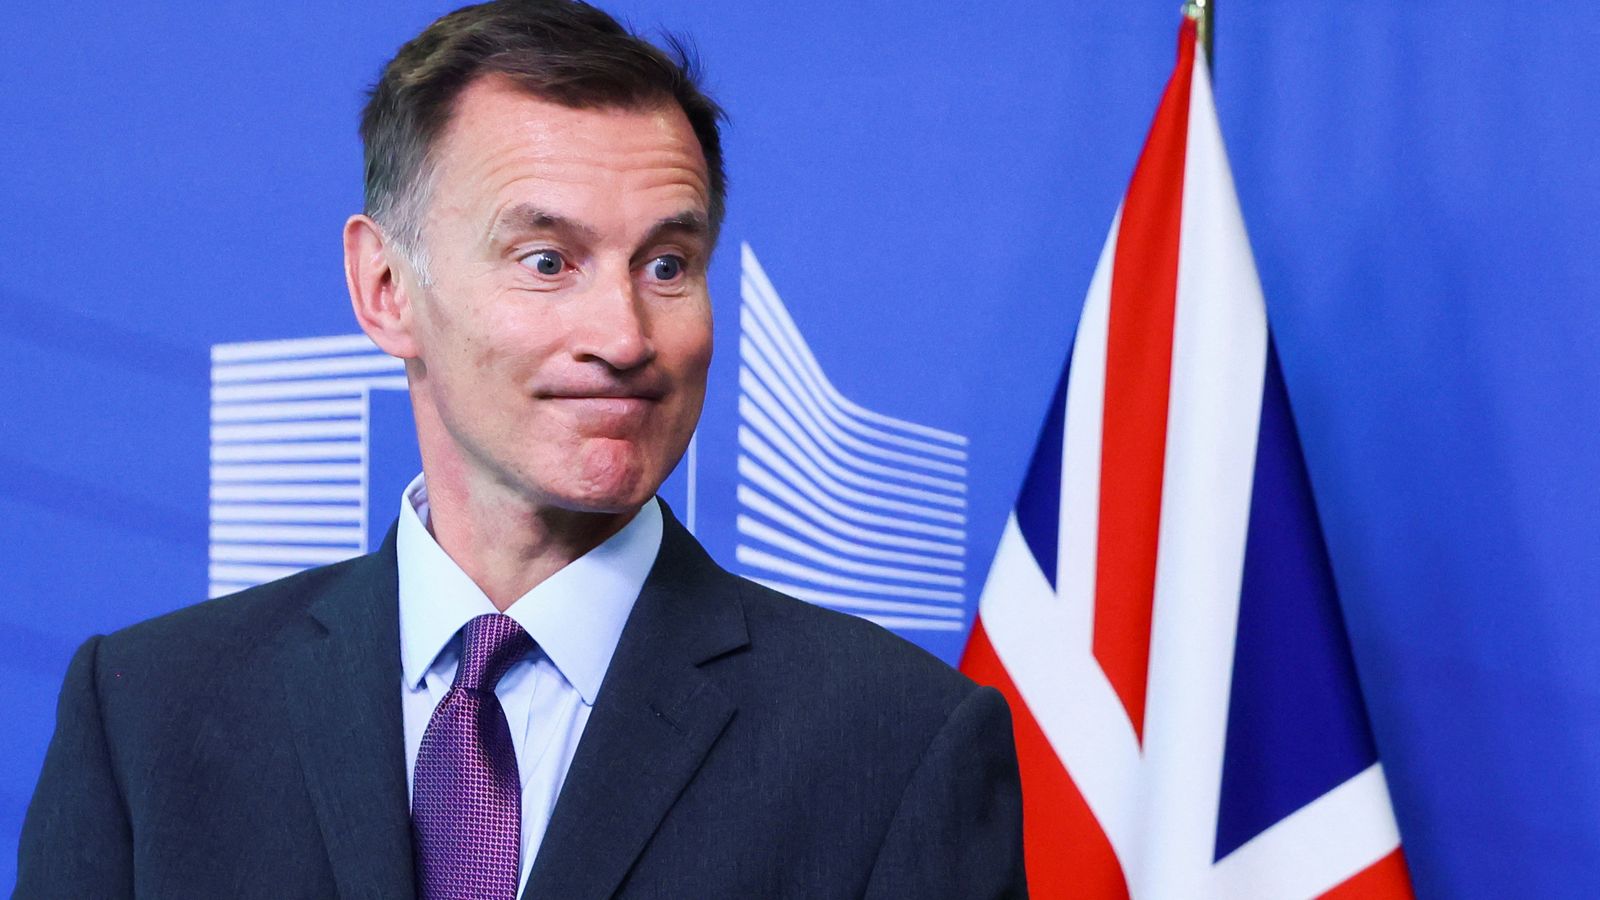 Battle over taxes: Will Jeremy Hunt be able to end Tory gloom at 'the survival conference'?